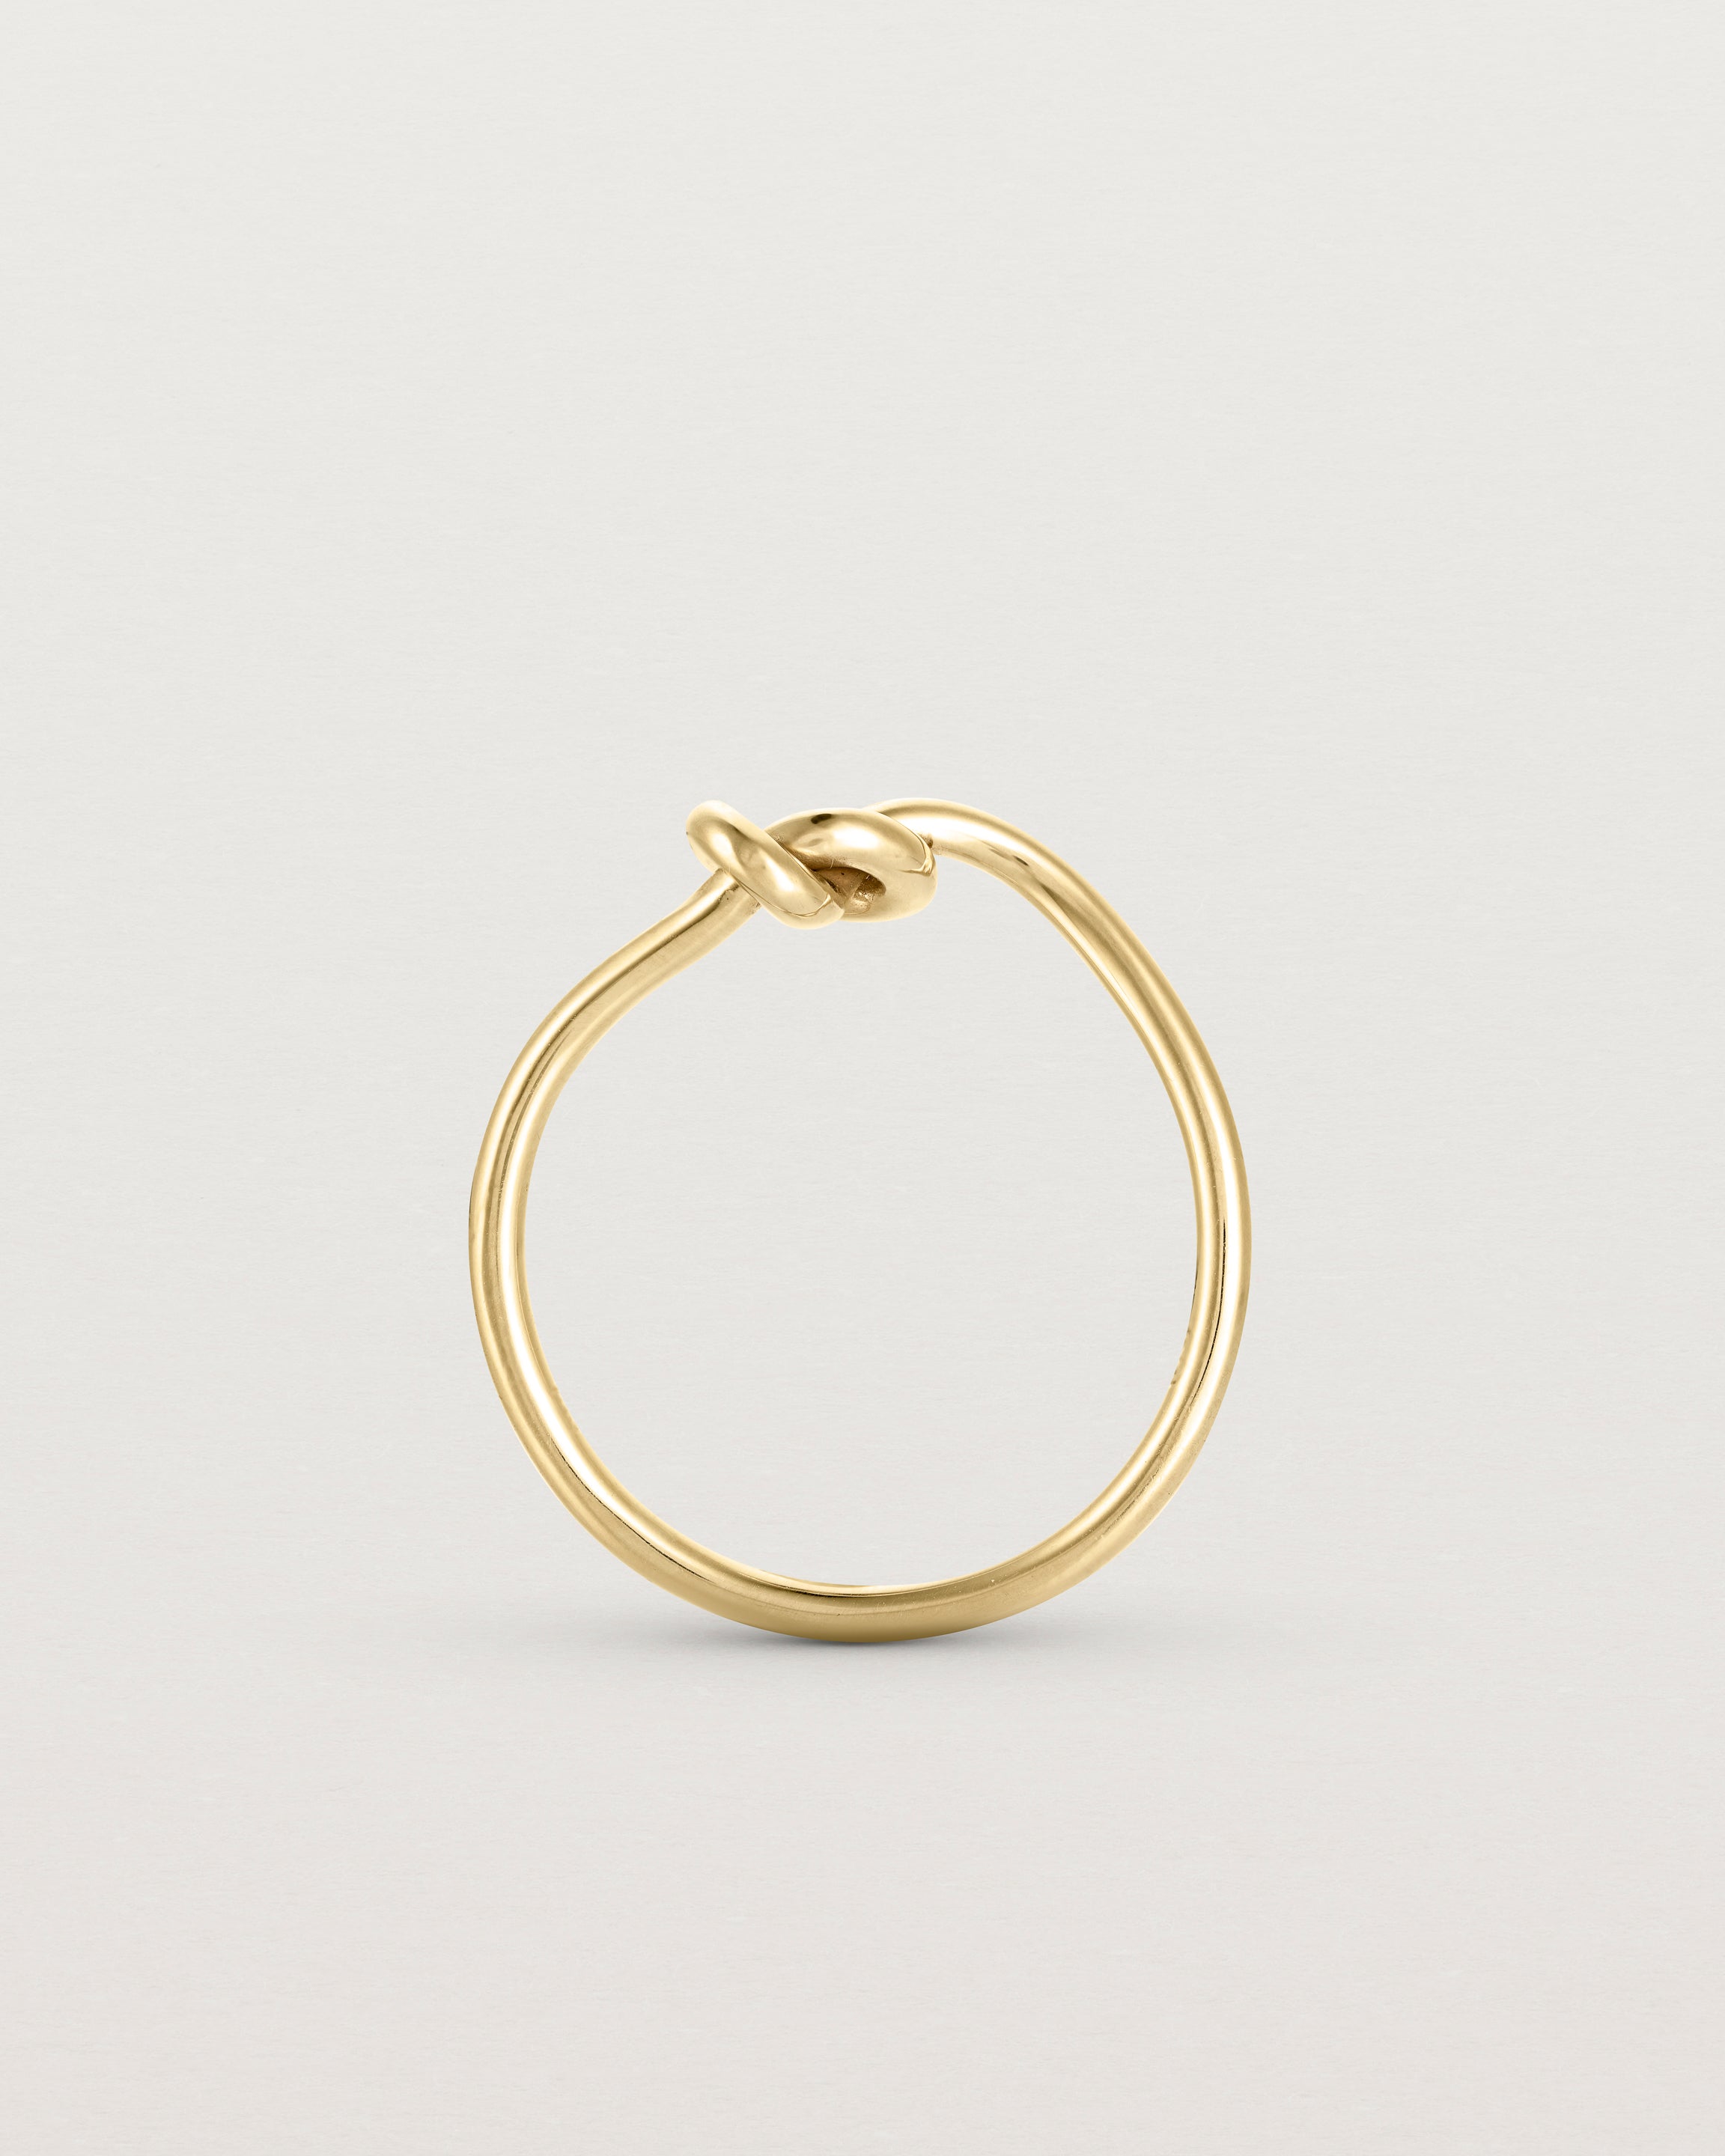 Standing view of the Cara Ring in yellow gold.